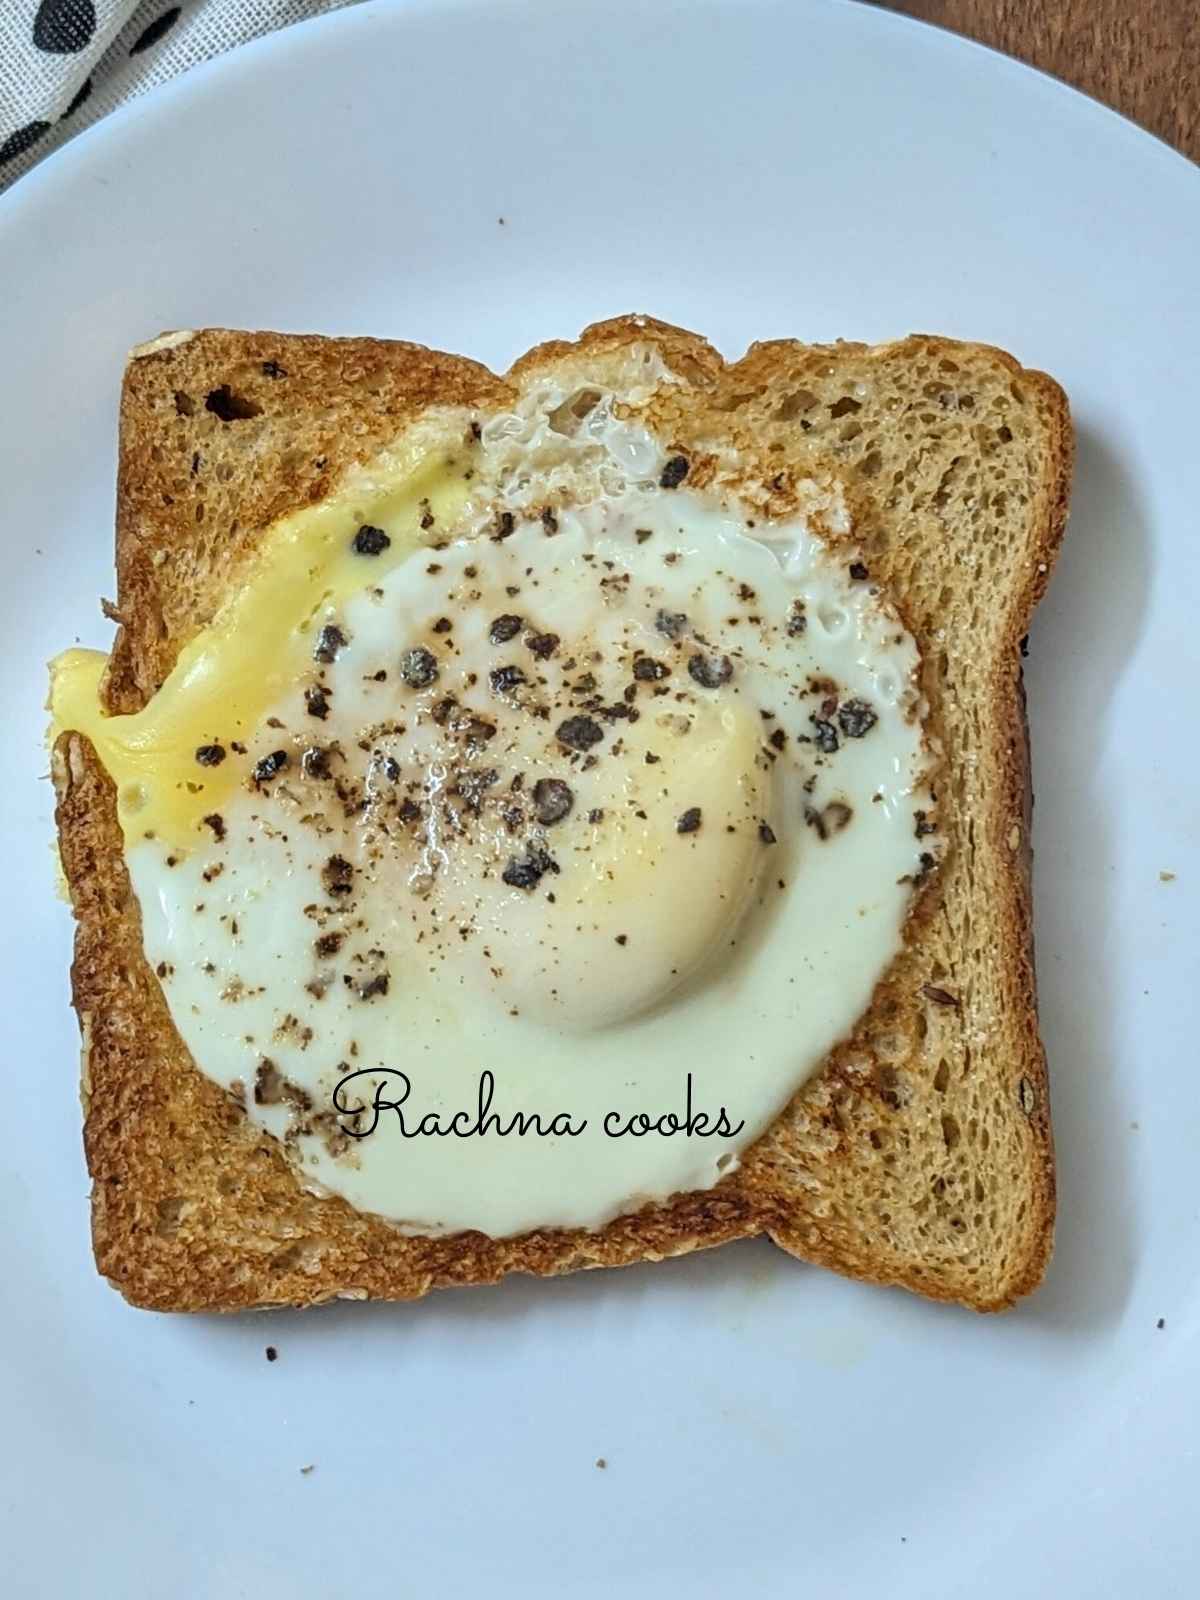 Runny egg yolk and well set white in a bread slice for egg toast.